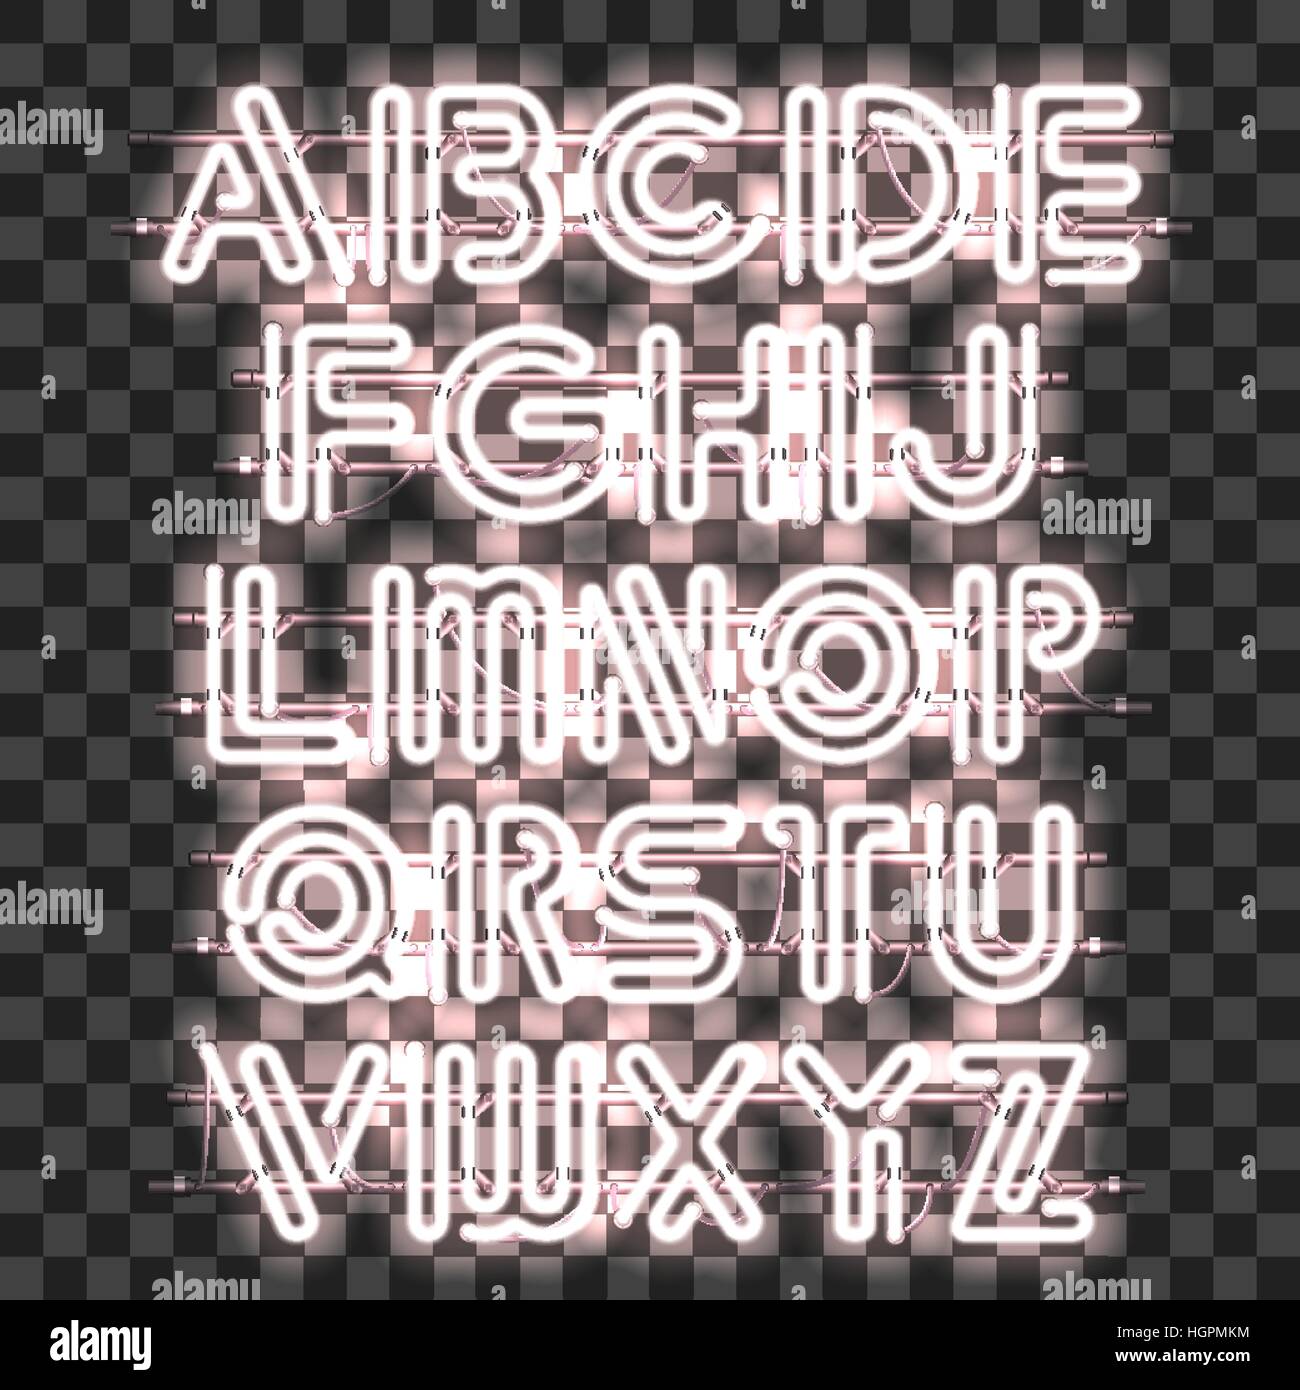 Bright Glowing White Neon Sign Characters Vector Font With Glow Light  Letters And Numbers Lamps Stock Illustration - Download Image Now - iStock